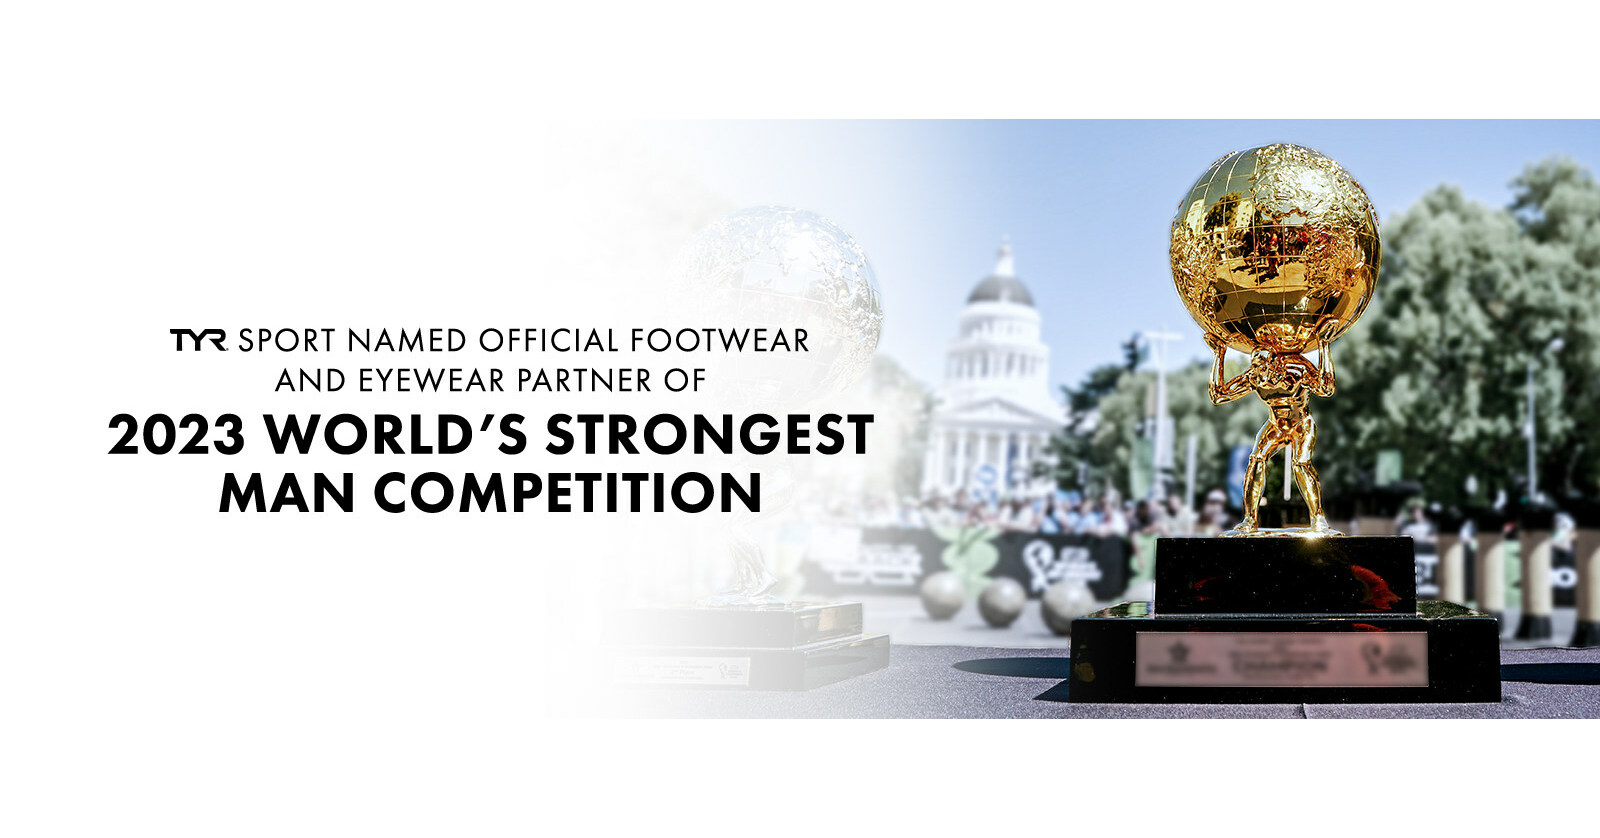 TYR SPORT Named official Footwear and eyewear partner of 2023 World's  strongest man competition